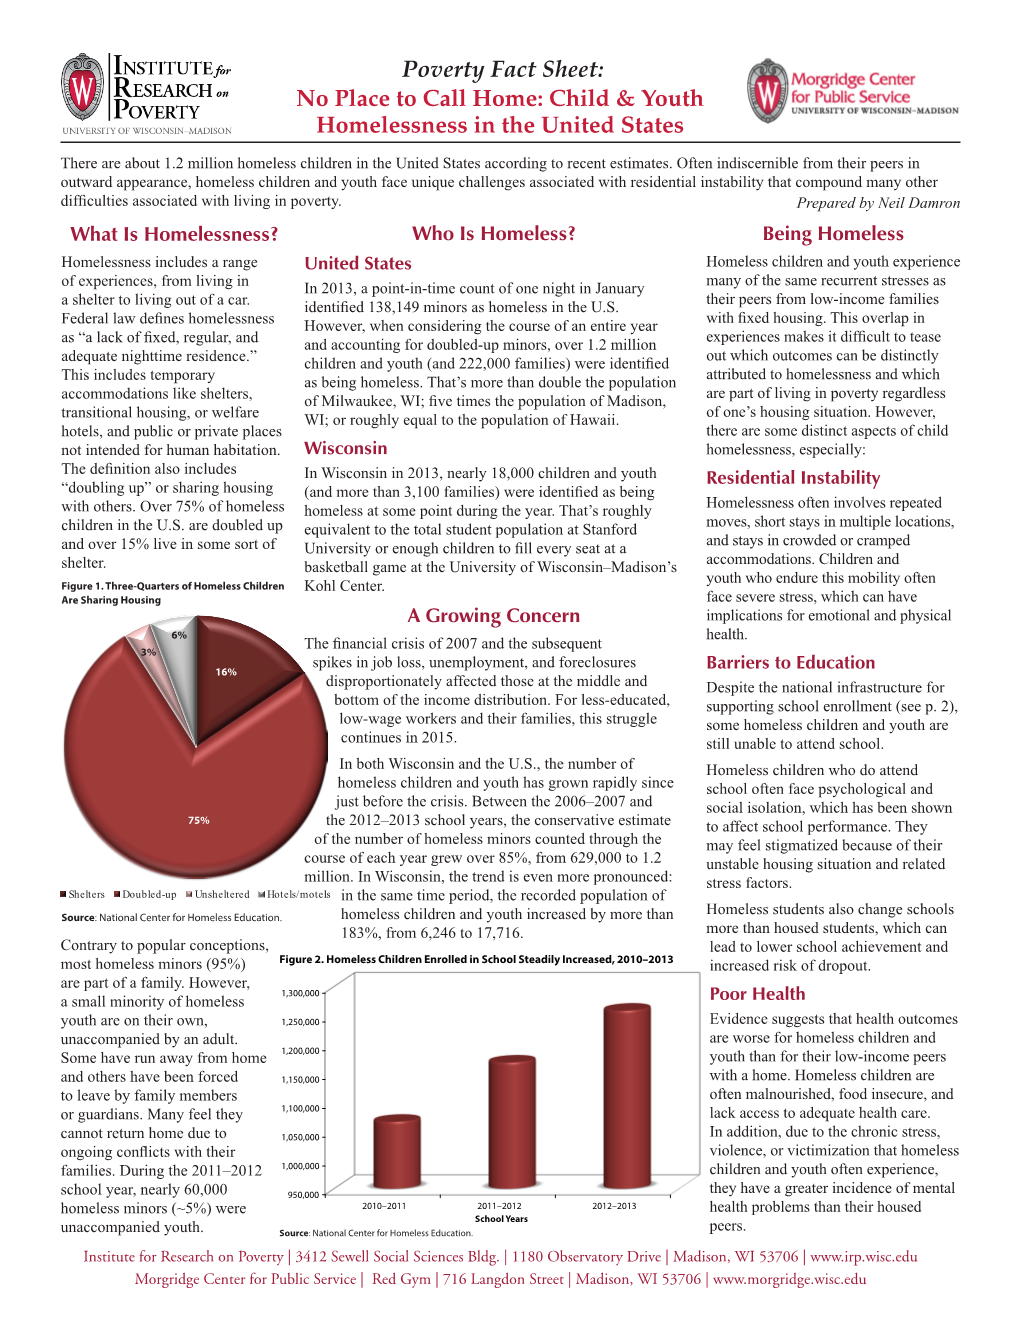 Child & Youth Homelessness in the United States Poverty Fact Sheet